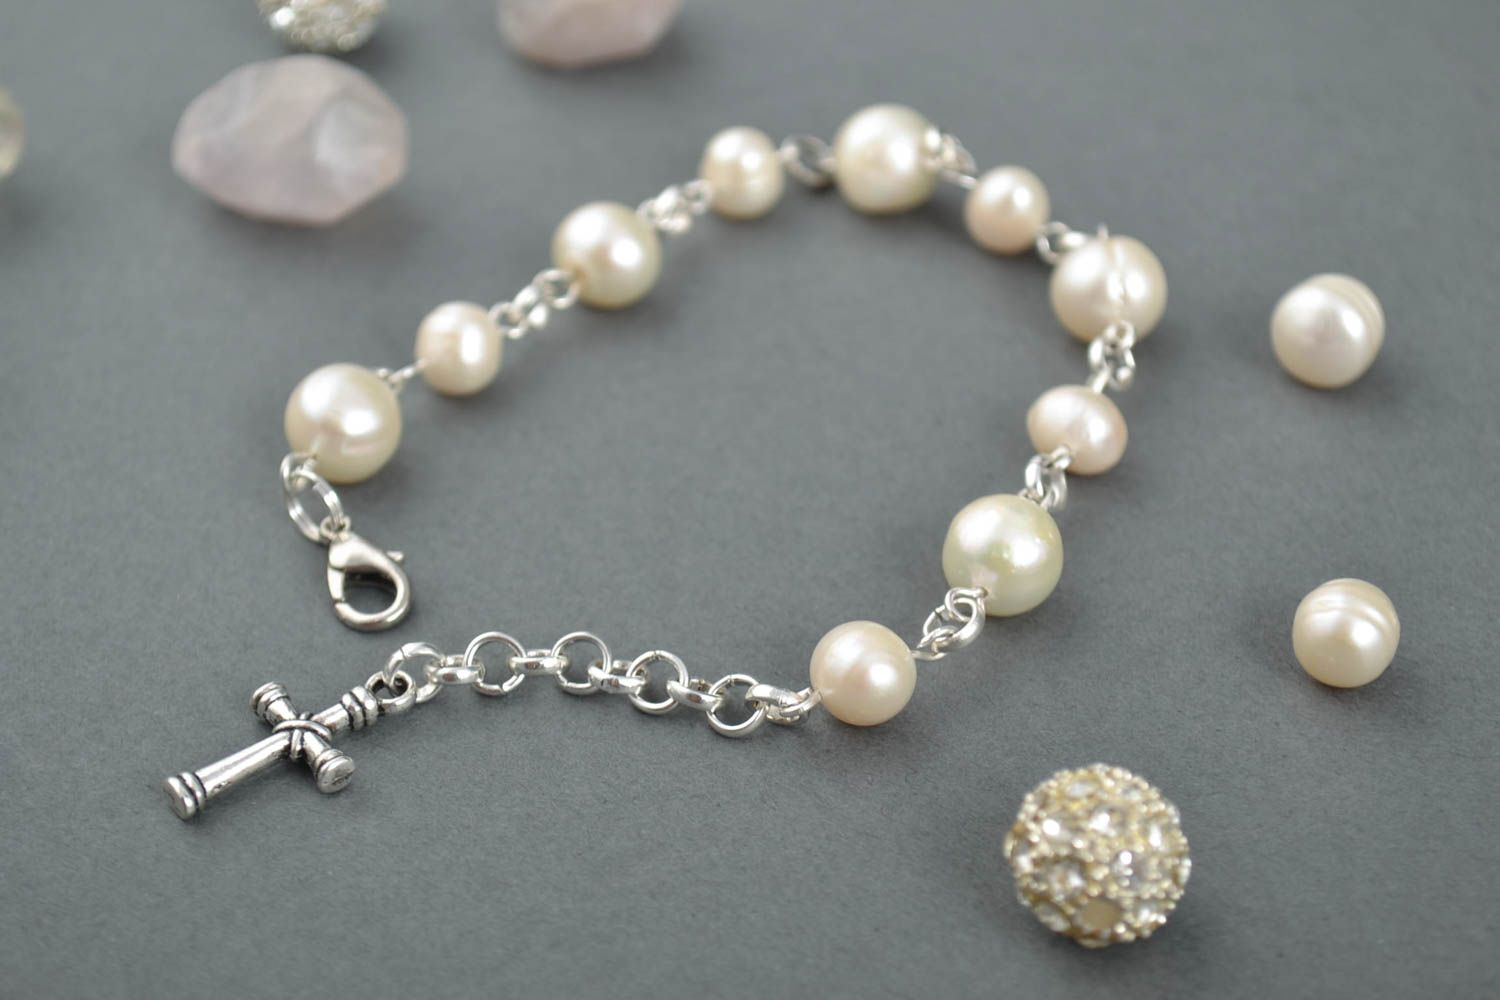 Pearl bracelet handcrafted jewelry charm bracelet fashion accessories gift ideas photo 1